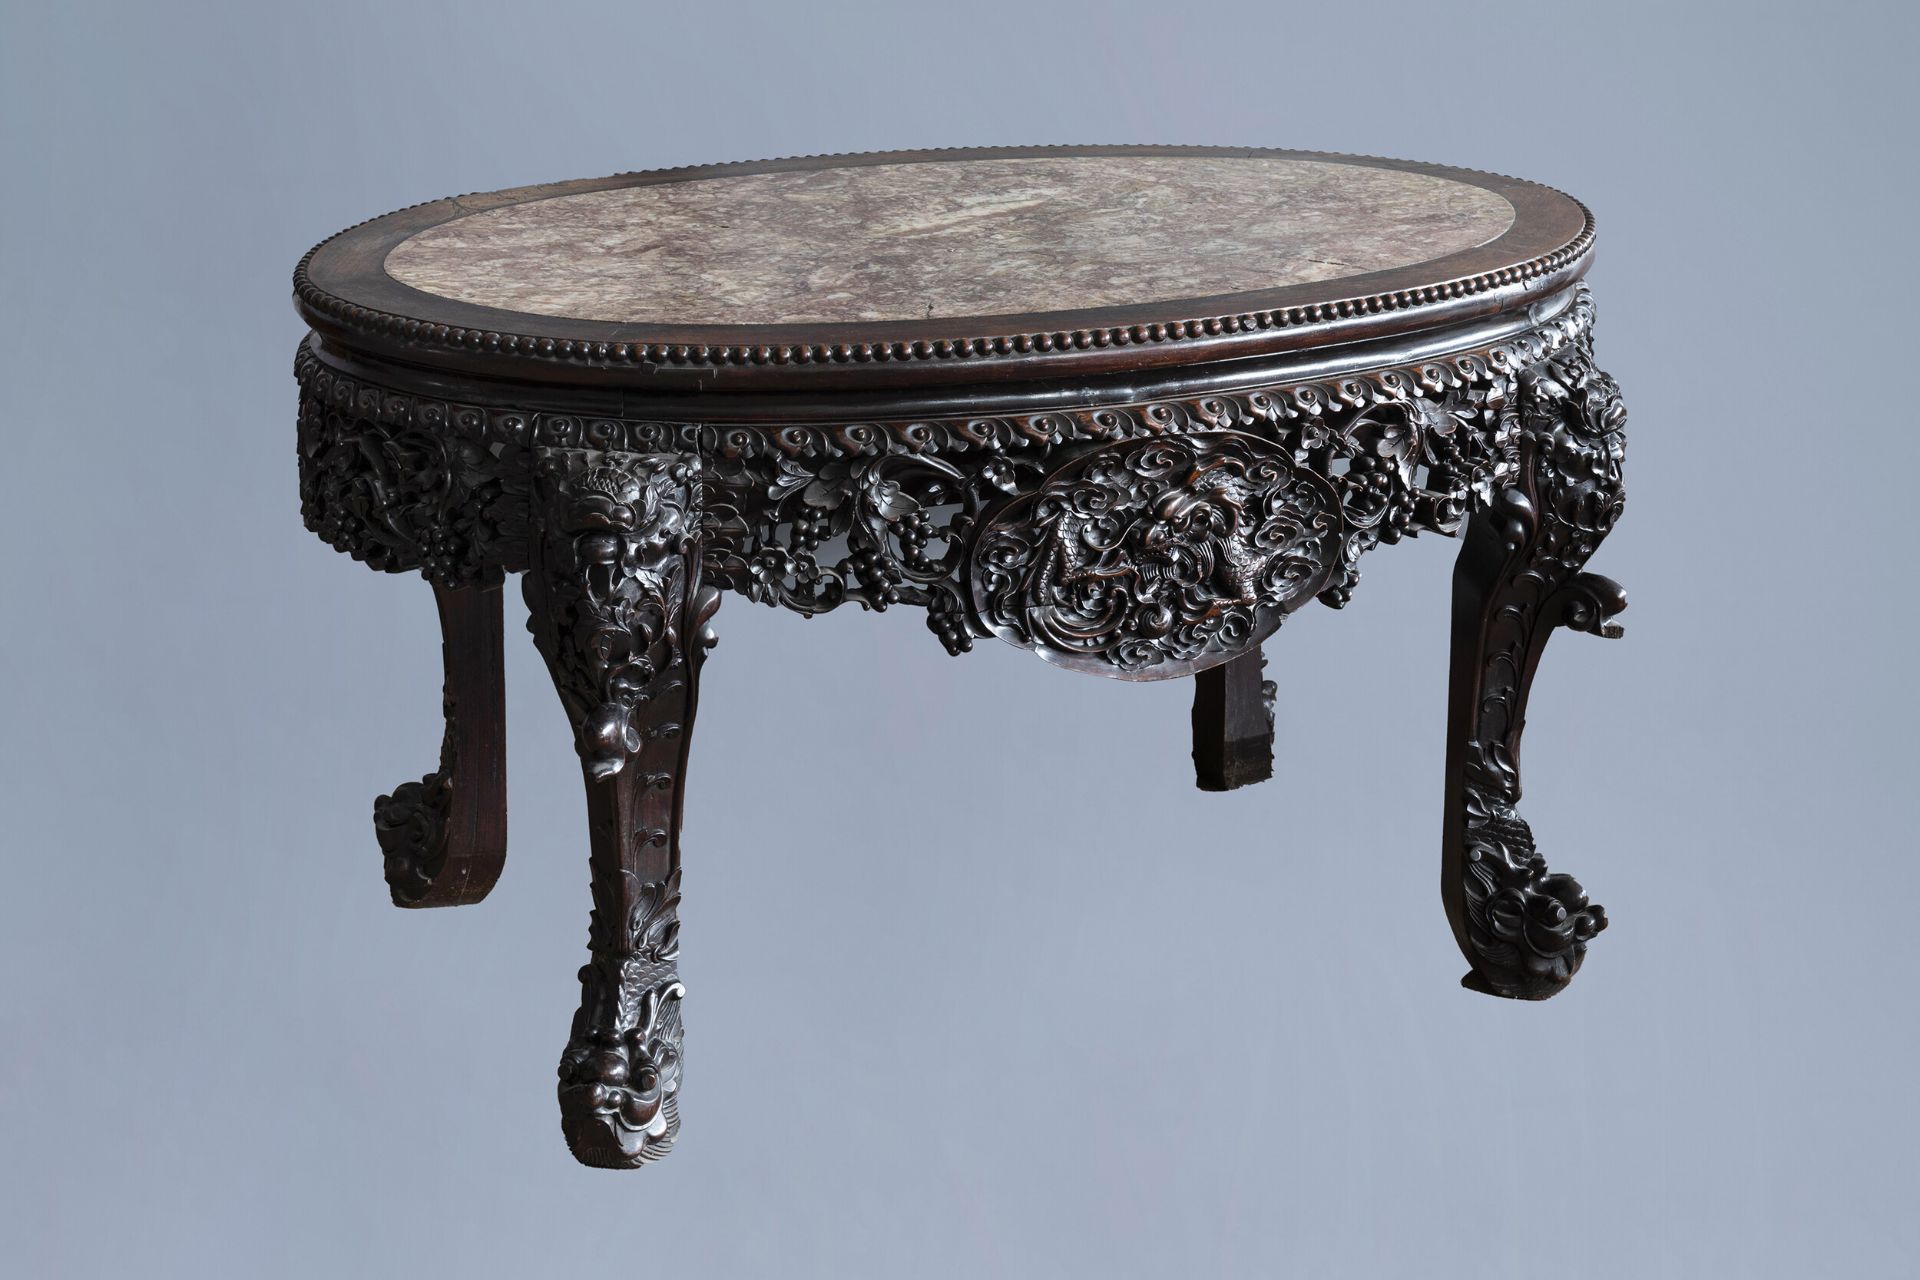 An oval Chinese finely carved wooden table with marble top, 19th C.